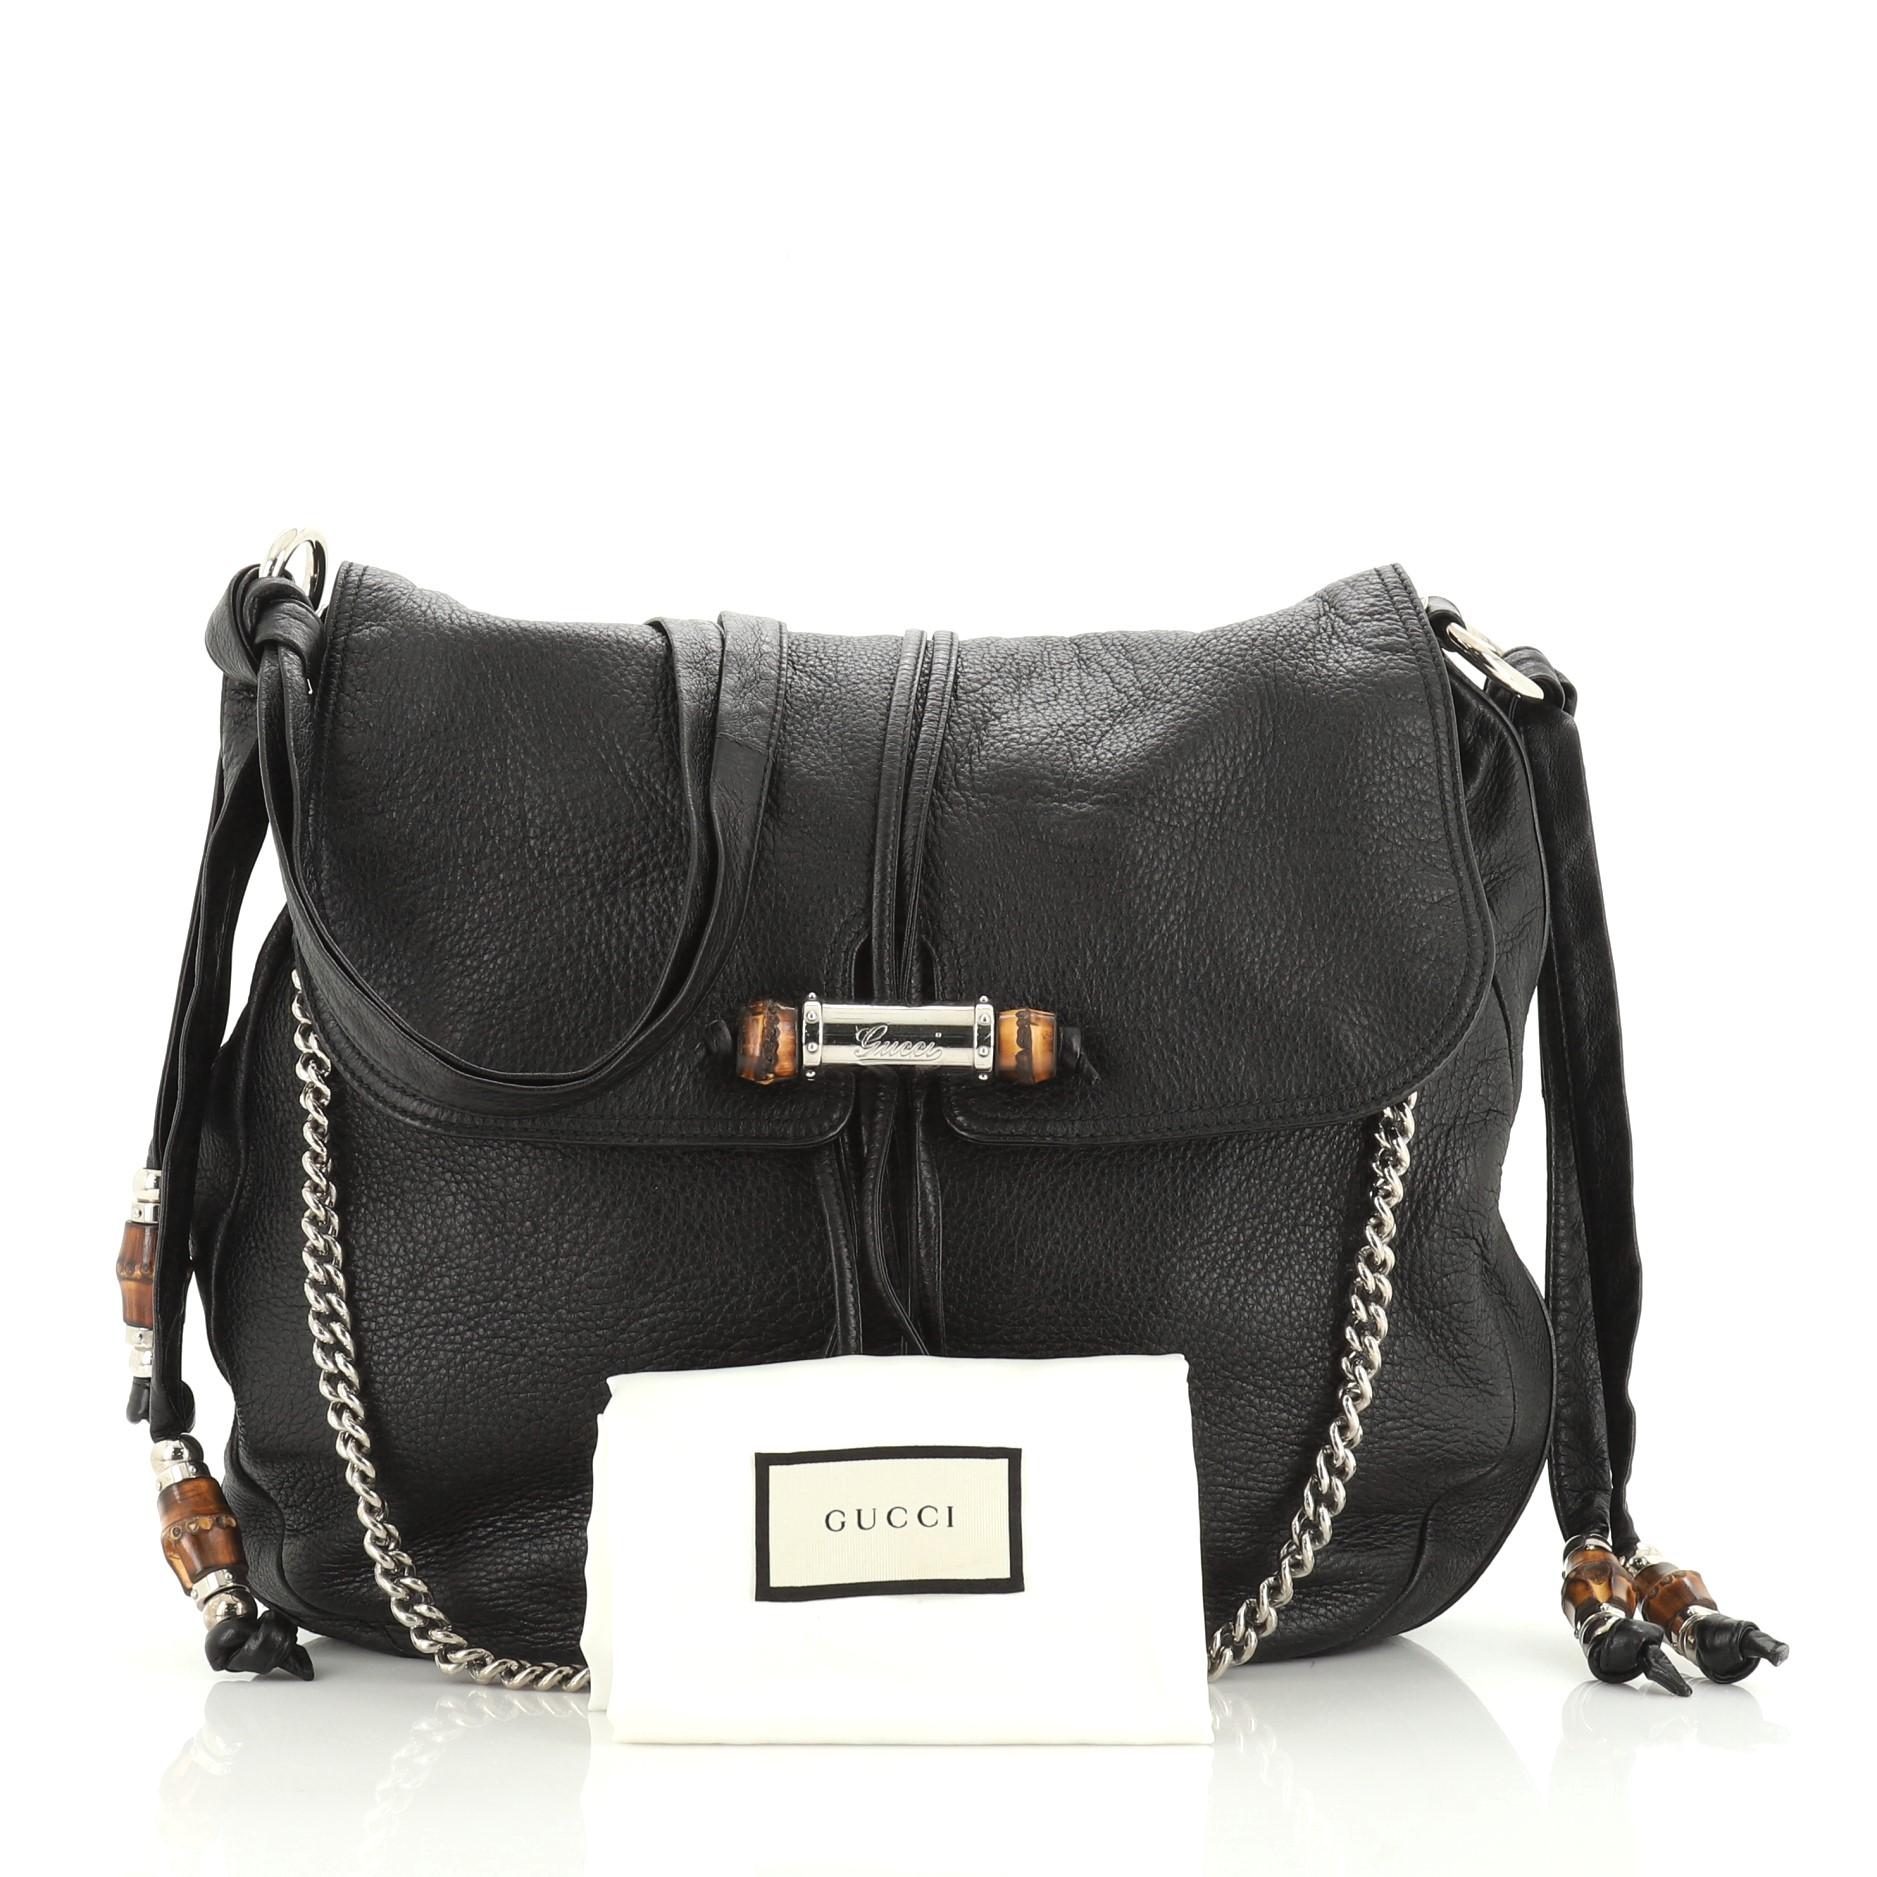 This Gucci Jungle Messenger Bag Leather Large, crafted from black leather, features gunmetal and bamboo-embellished leather crossbody strap with an adjustable knot, detachable metal chain strap, a fold-over flap with gunmetal-embellished tassels to